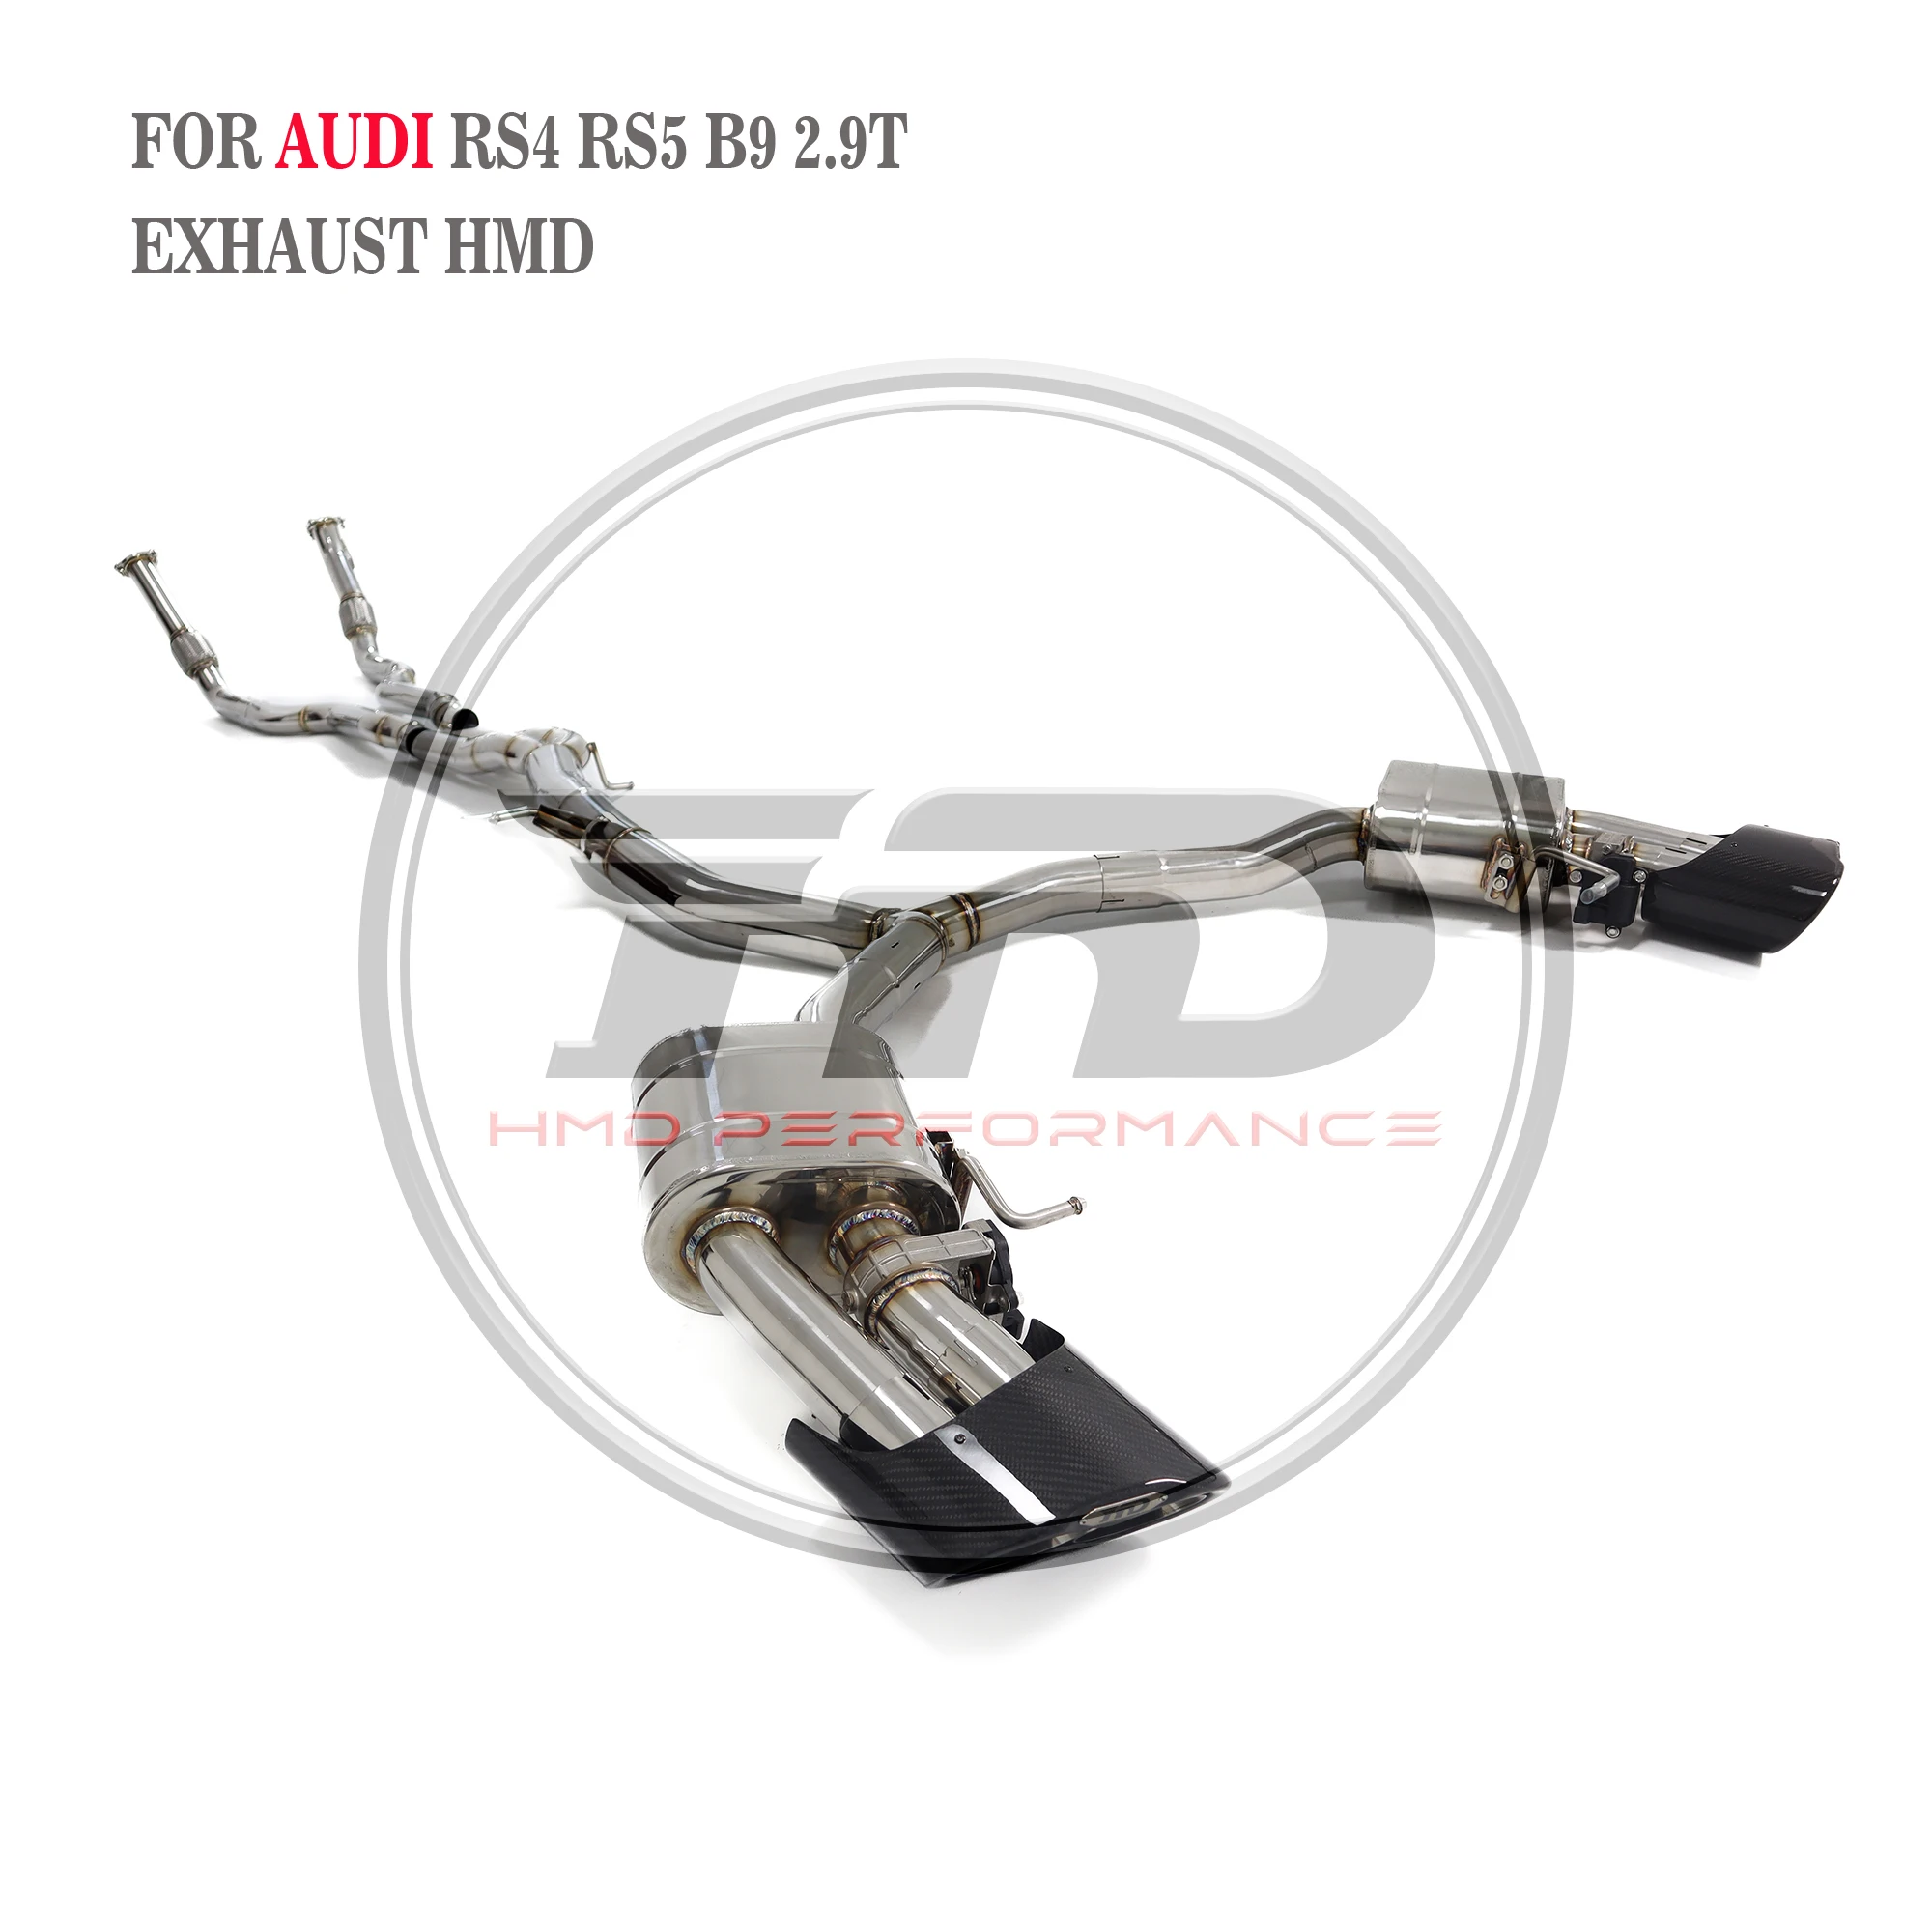 

HMD Stainless Steel Exhaust System Performance Catback Front Pipe for Audi RS4 RS5 B9 2.9T Valve Muffler With RS Style Tip